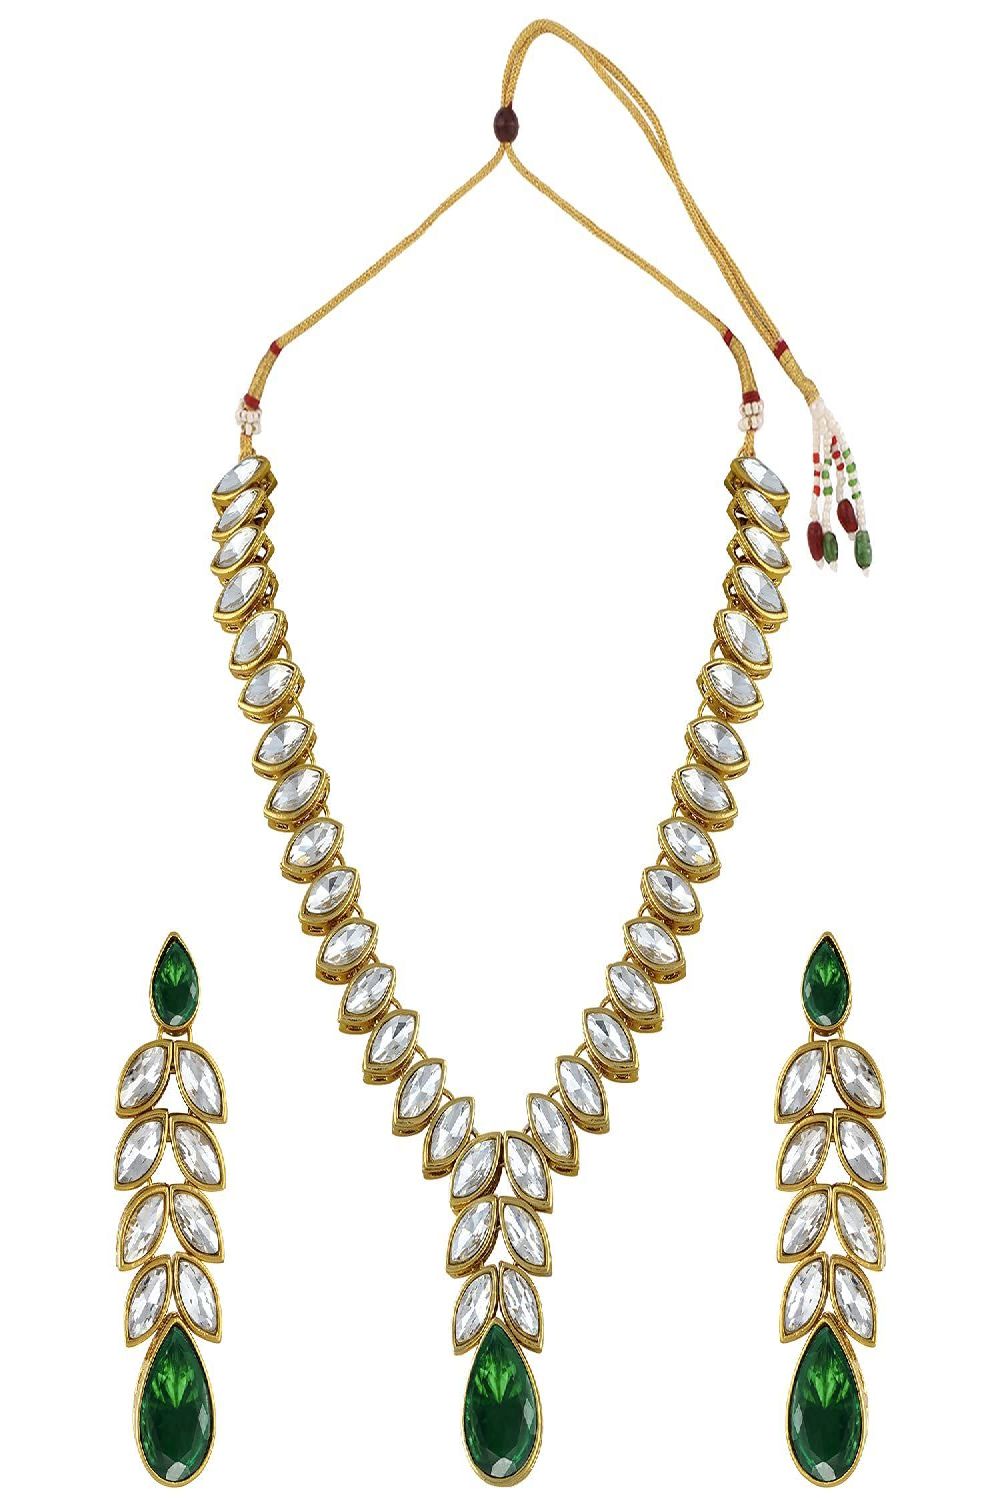 Gold Plated Traditional Blue Stone Studded Necklace Jewellery Set with Dangle Earrings